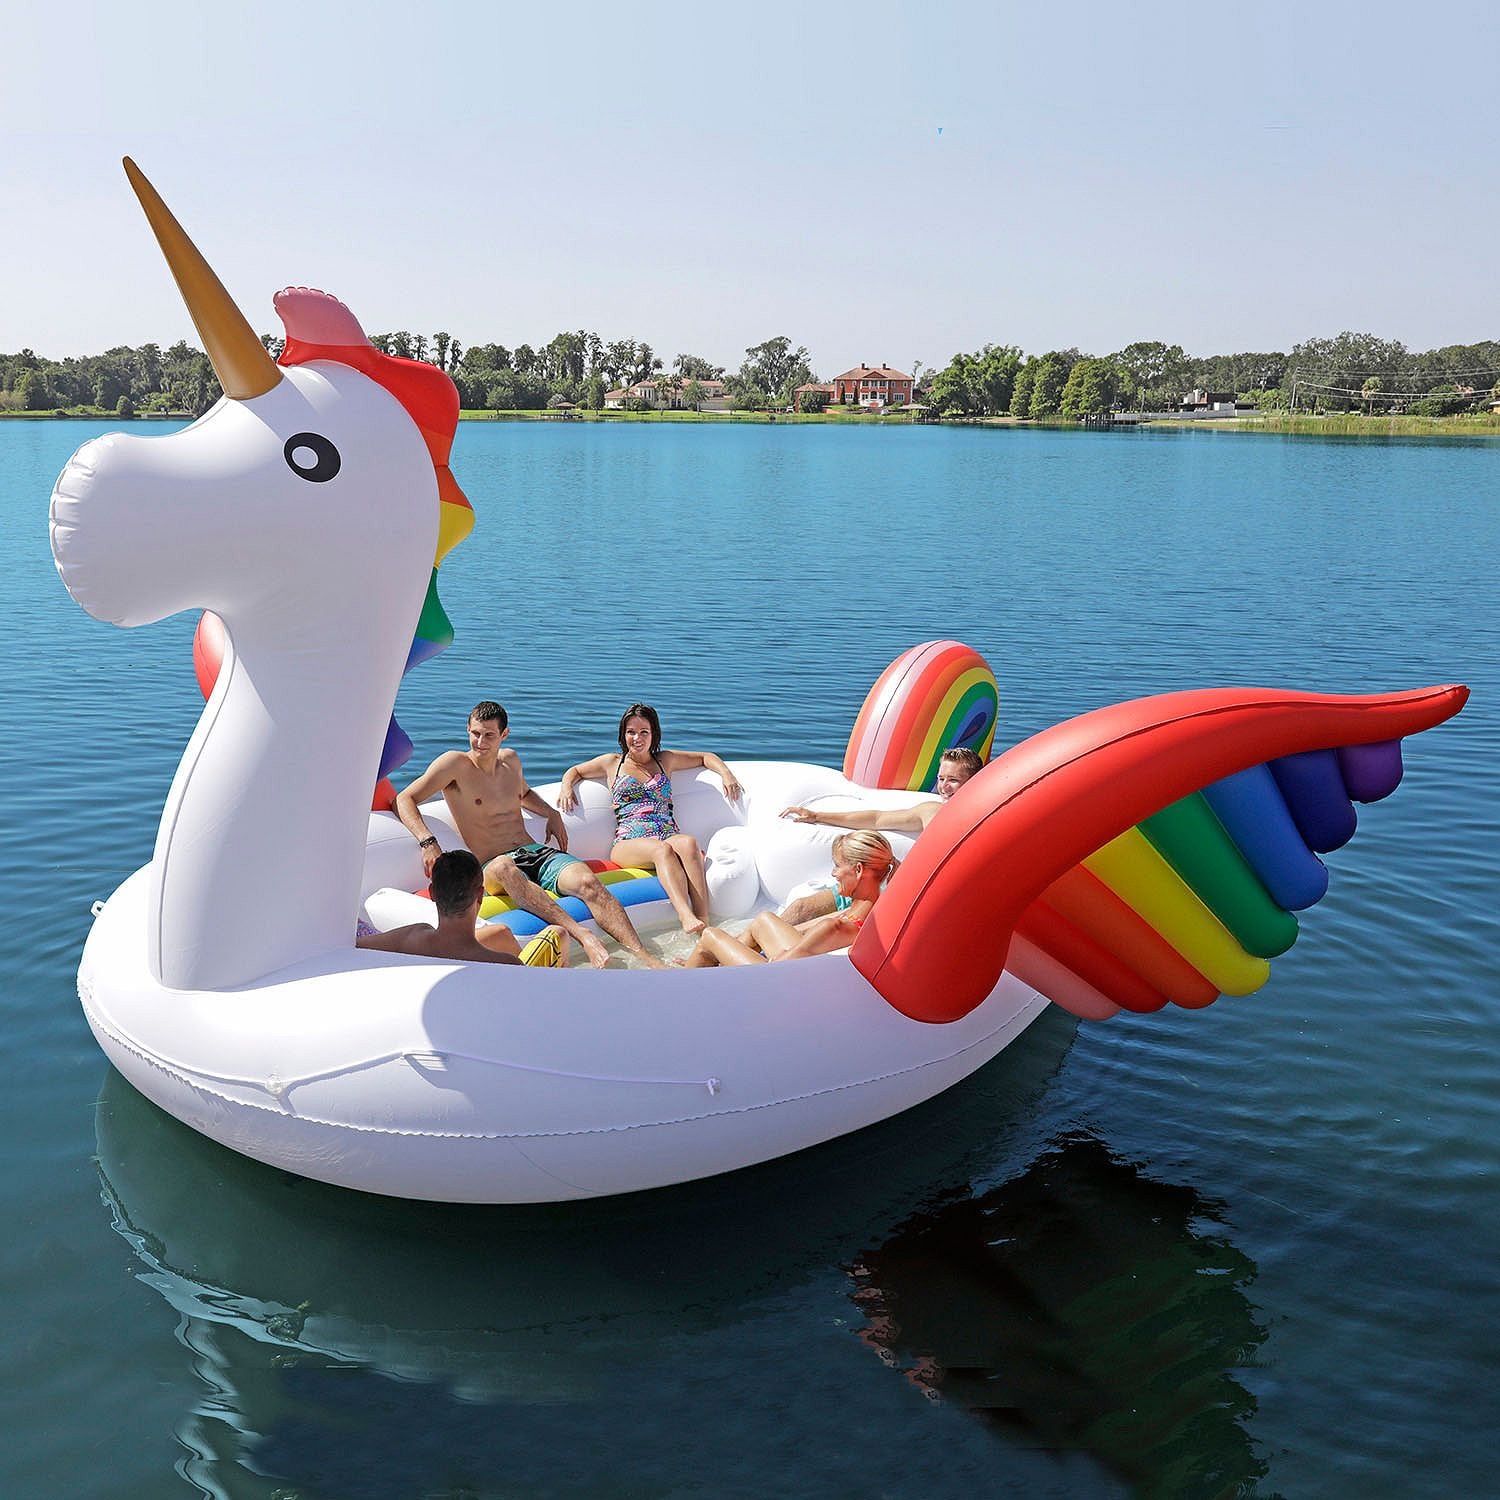 Details about   JUSTICE GIANT RAINBOW UNICORN POOL FLOAT 102” X  56” WOW SUPER COOL FUN!! 